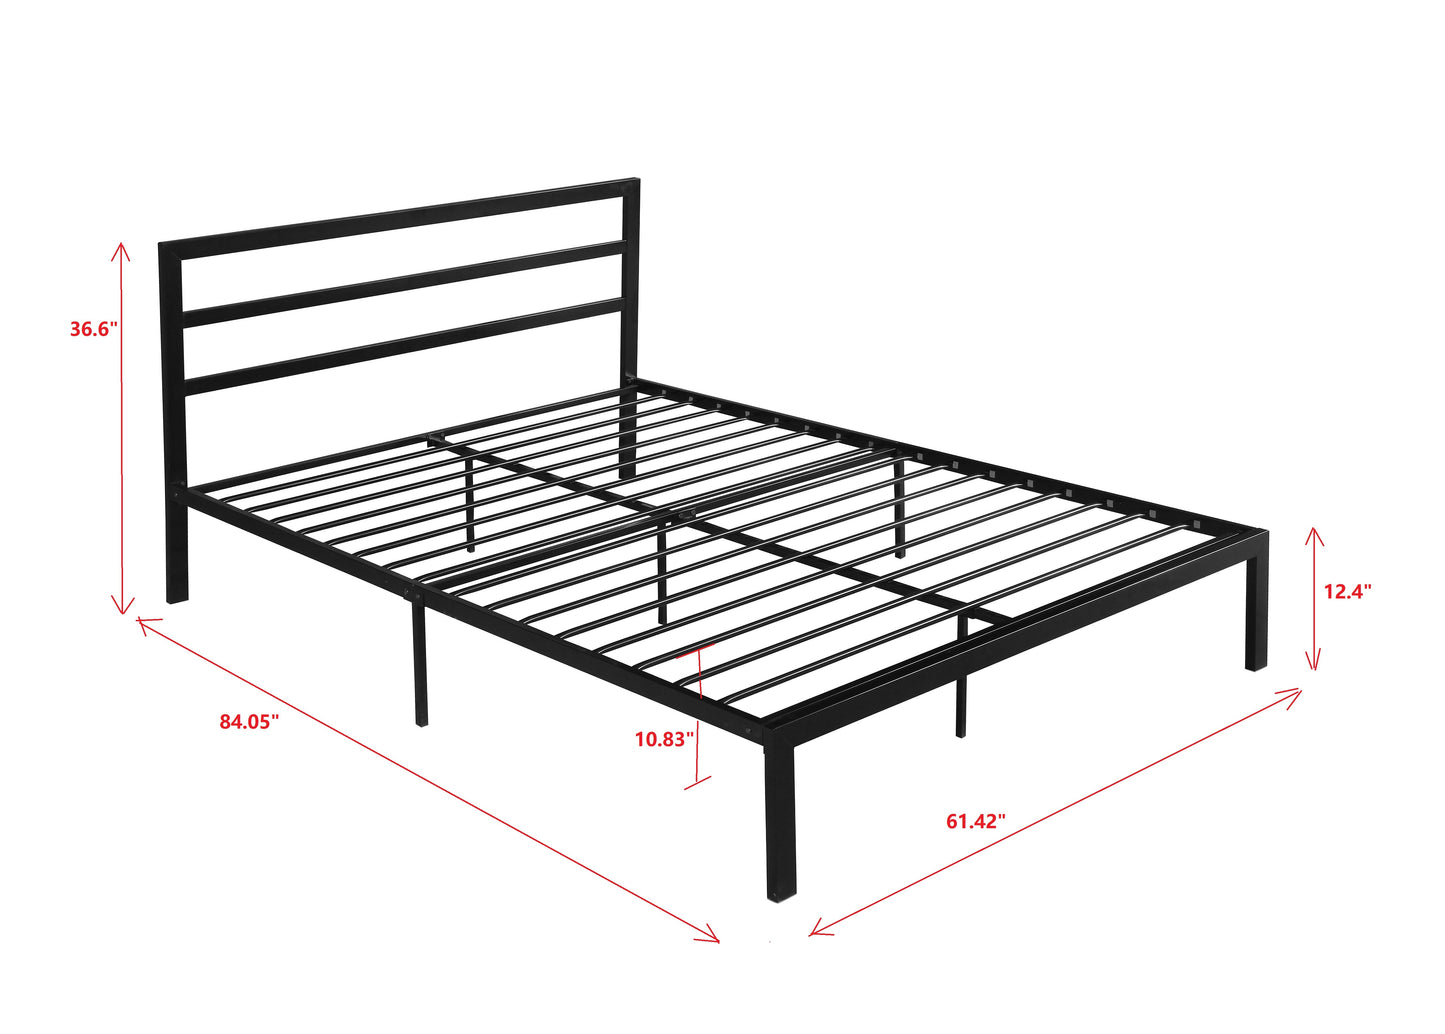 Queen Metal Bed, HSUNNS Black Queen Size Metal Platform Bed Frame with Headboard and 12'' Under-bed Storage, Metal Queen Bed for Boys Girls, No Box Spring Needed, Black